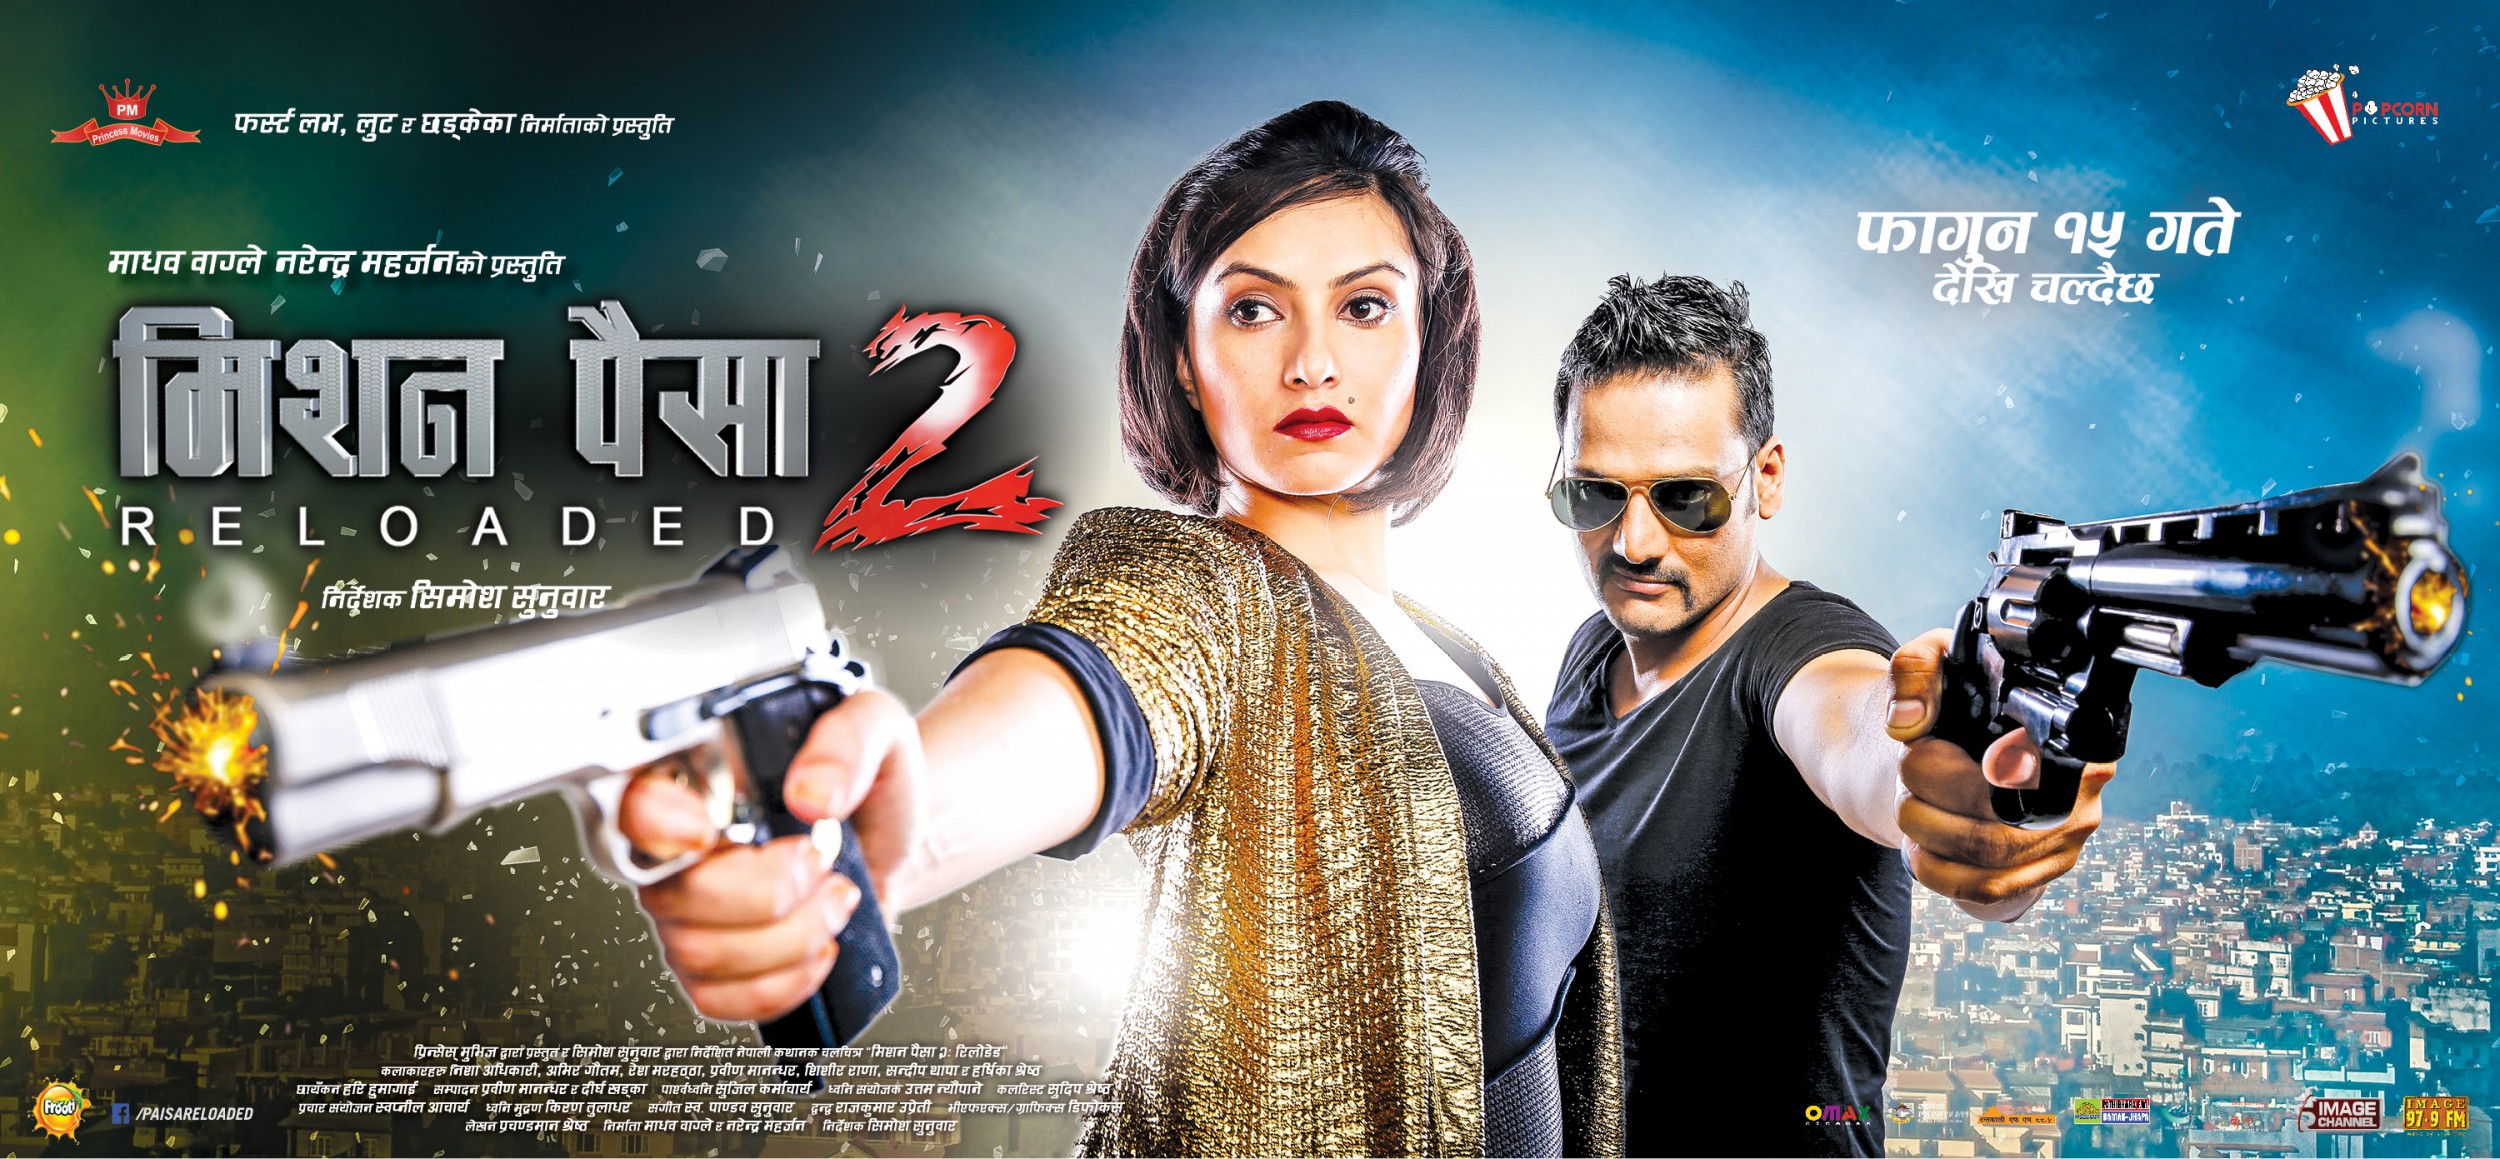 Mega Sized Movie Poster Image for Mission Paisa 2: Reloaded (#5 of 6)